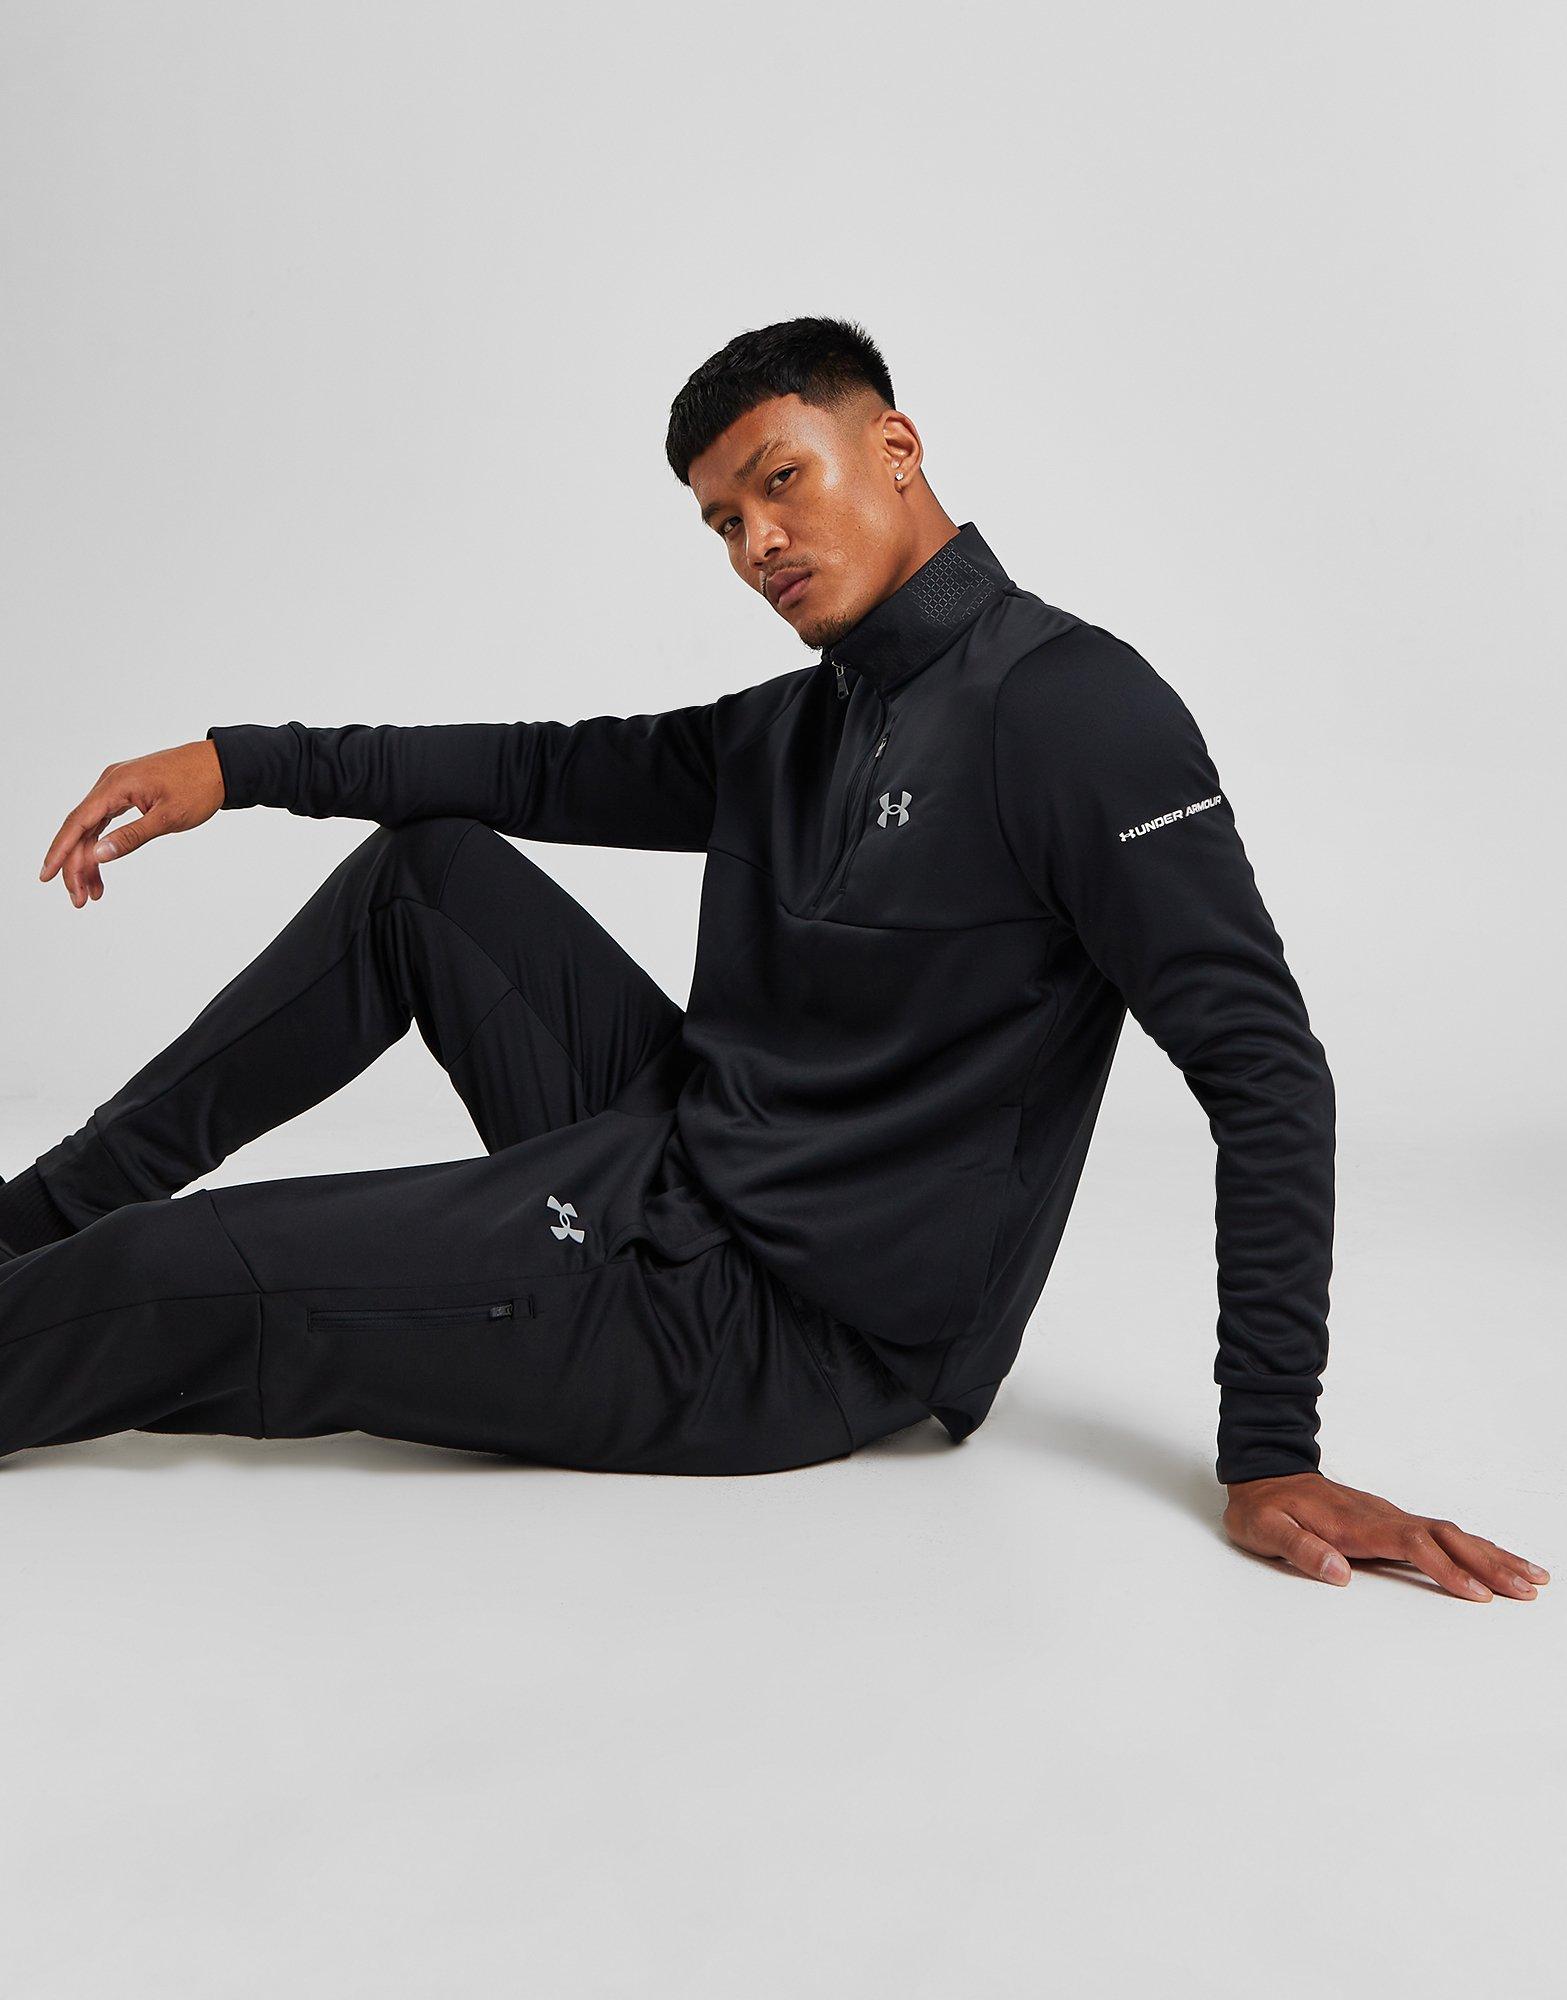 Under Armour Challenger tracksuit in black